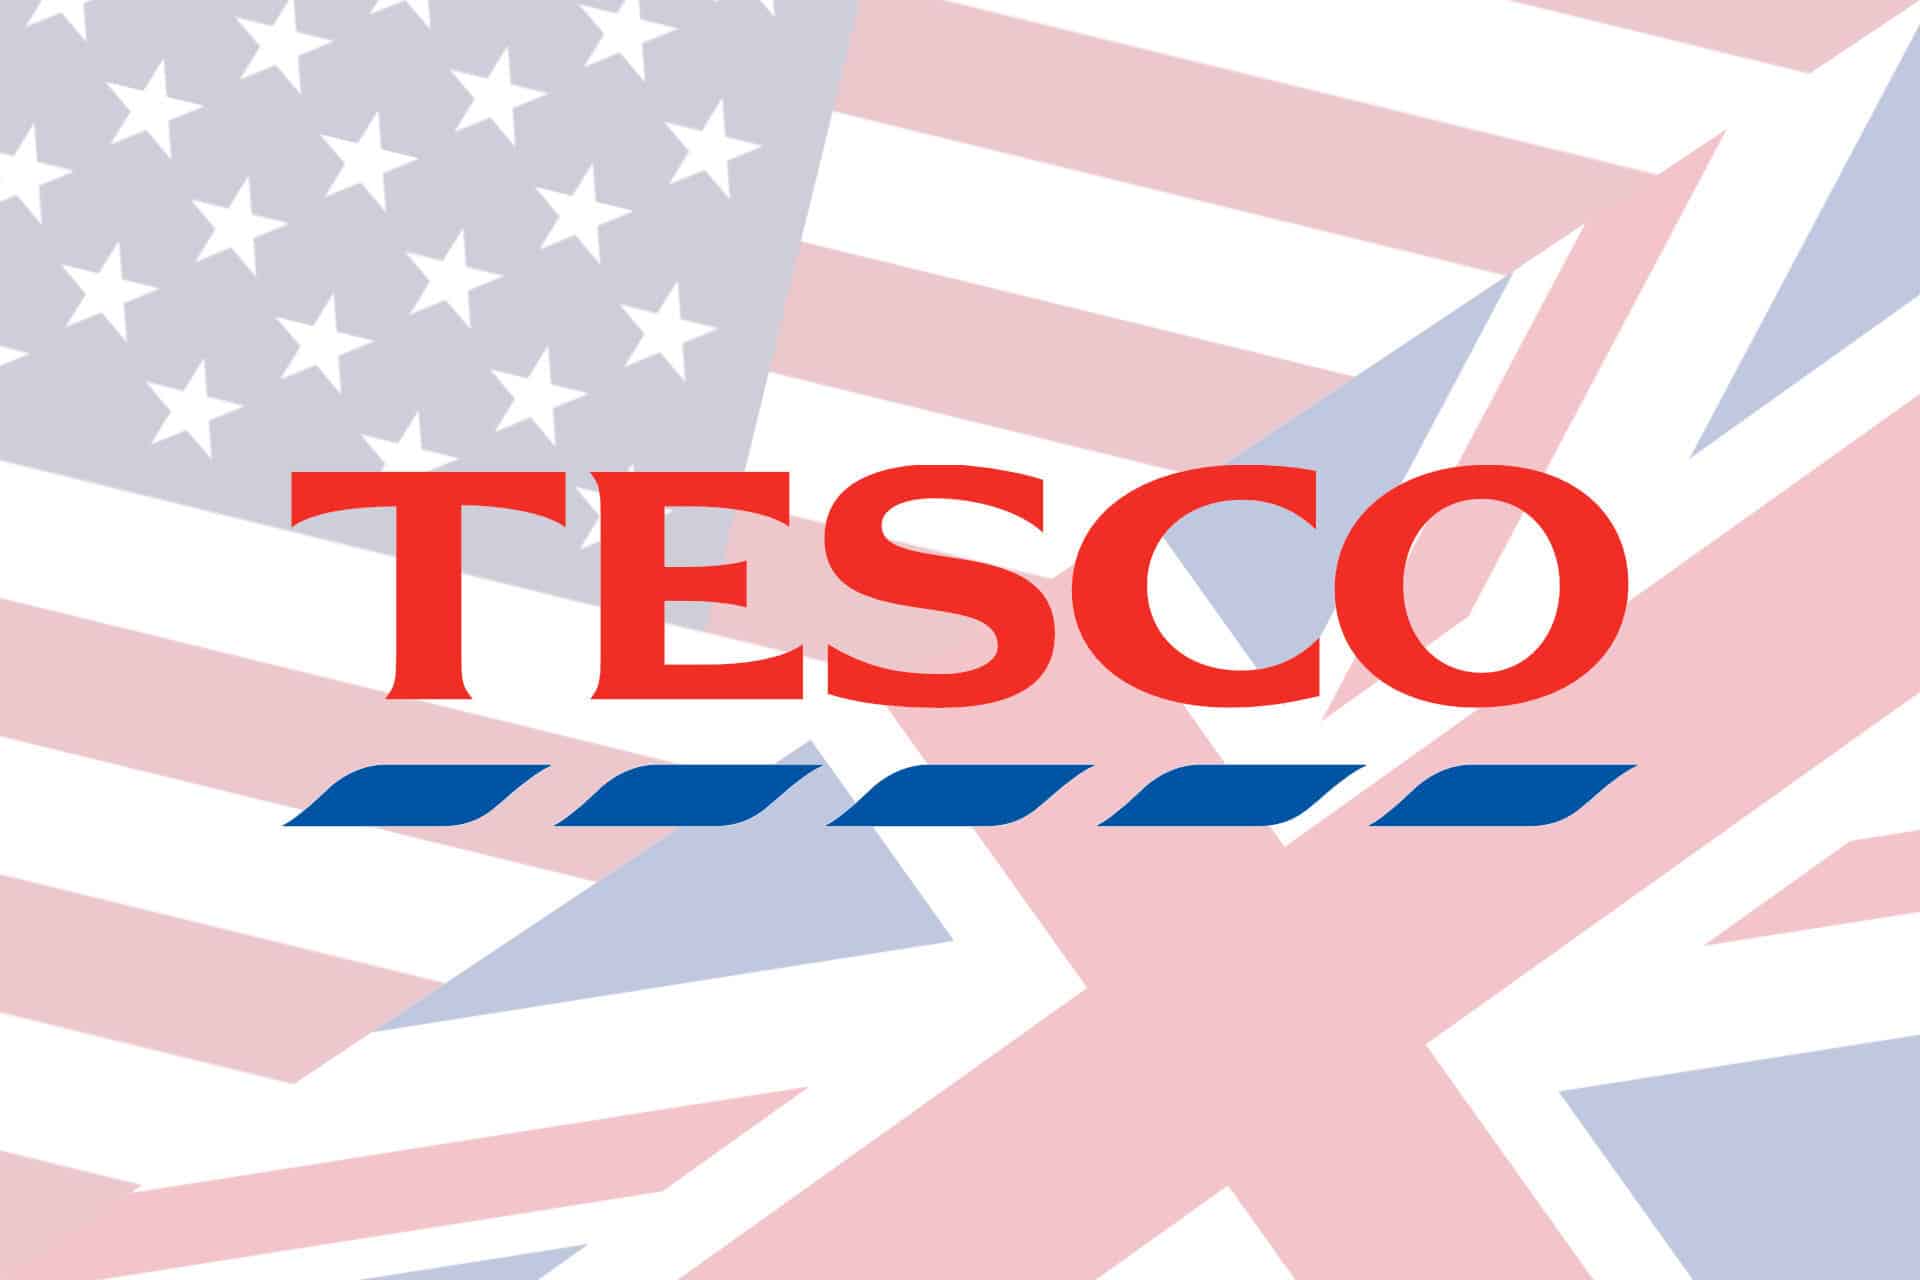 Tesco logo over US and UK flags